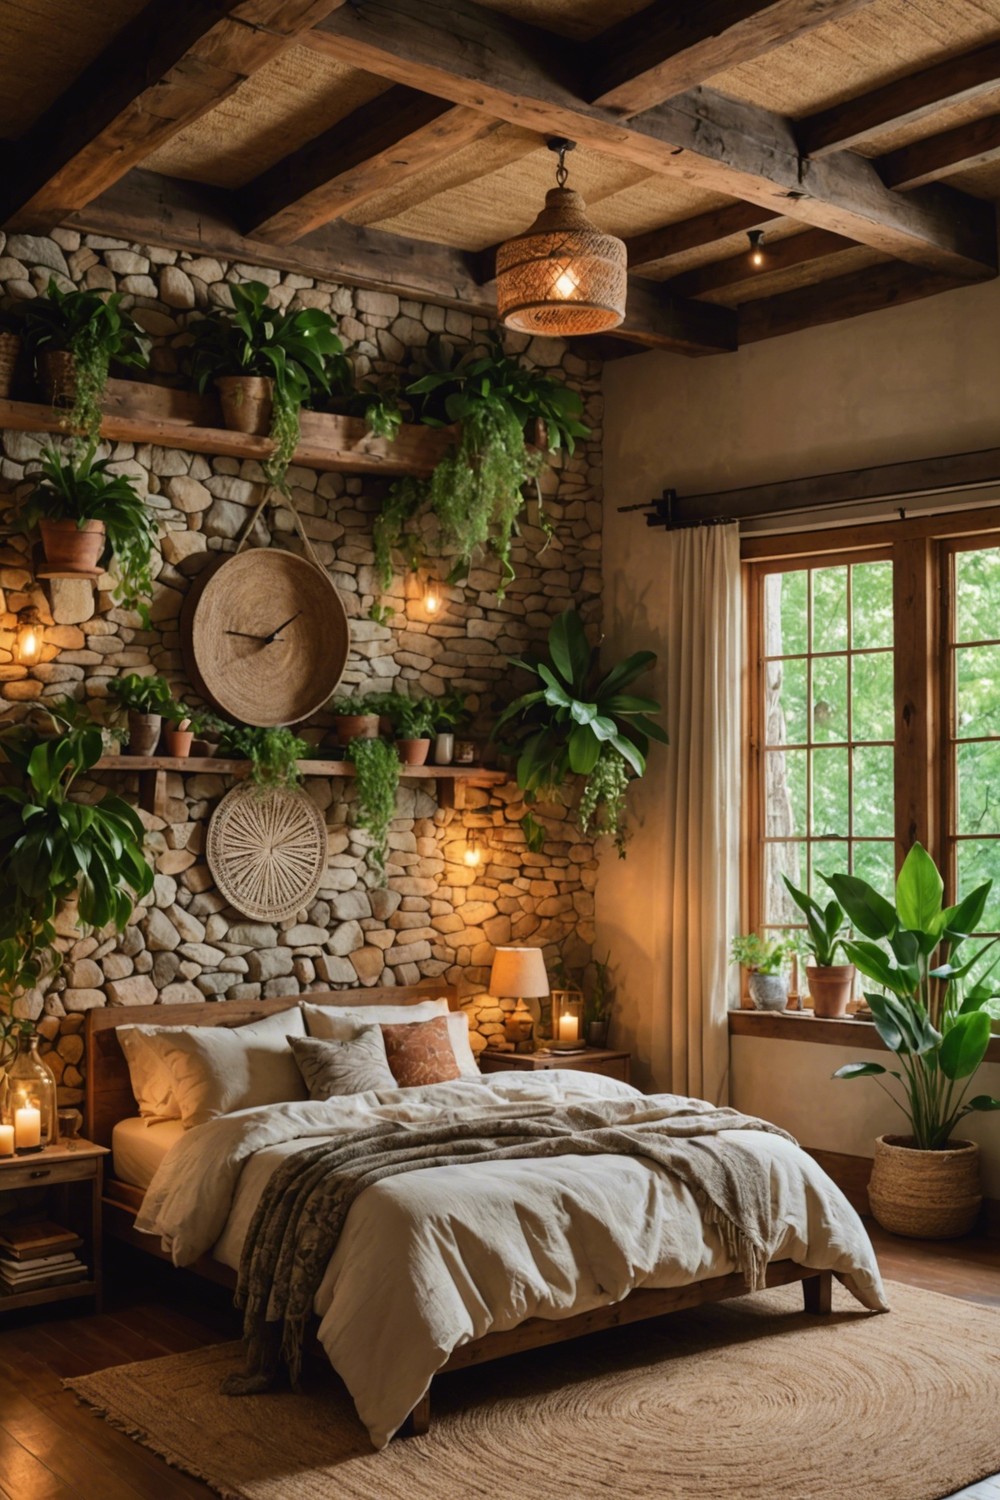 Rustic Charm with Natural Elements: